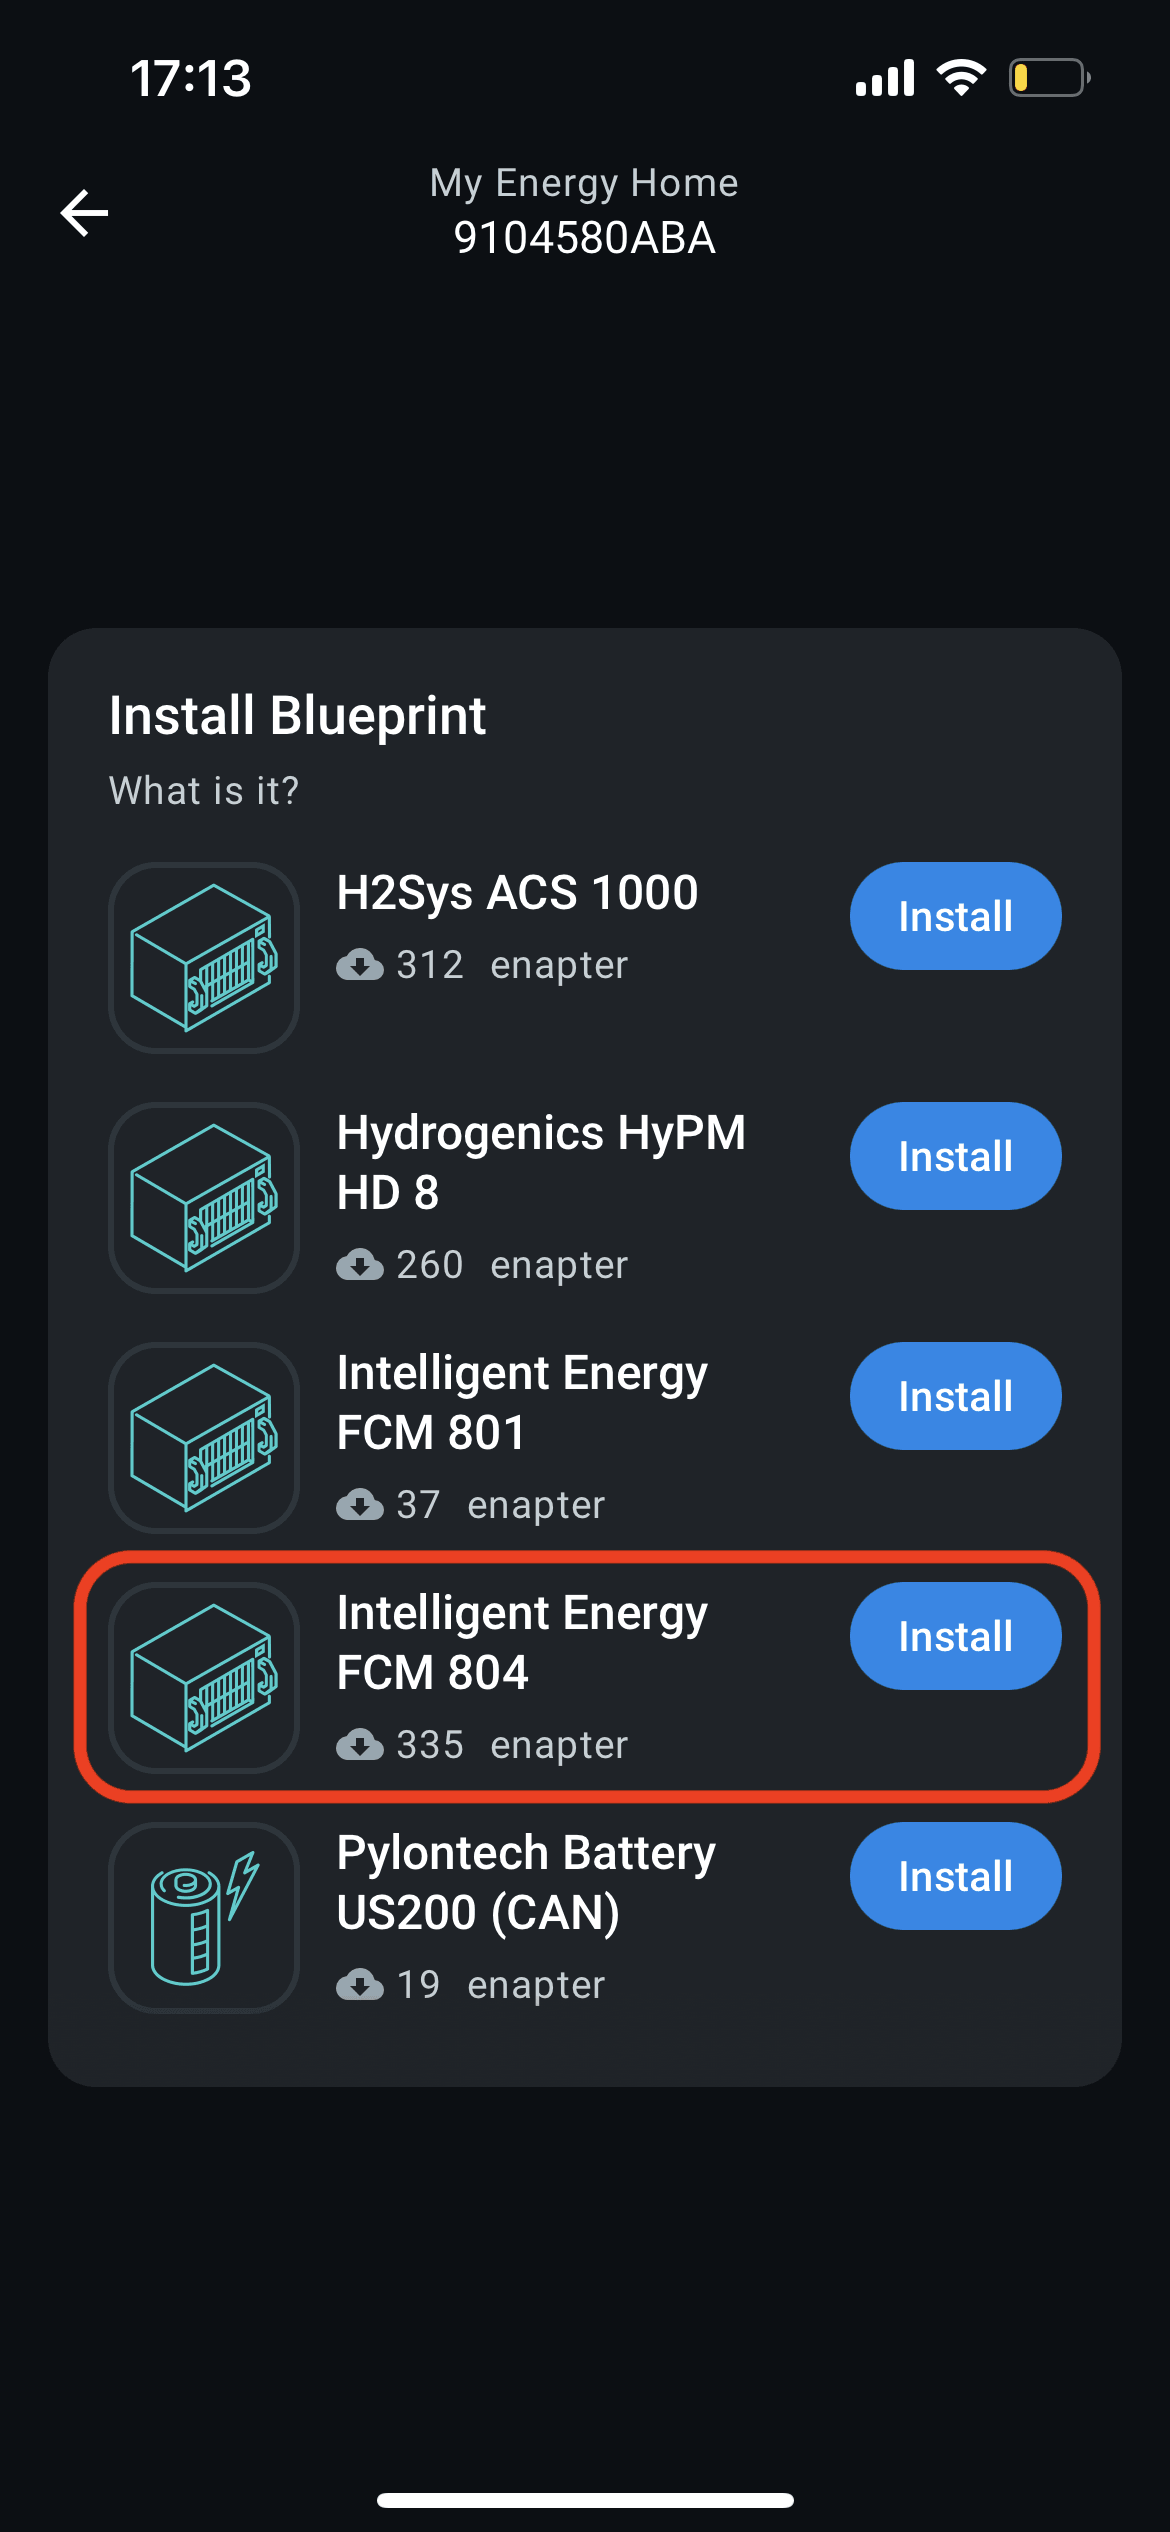 Find Intelligent Energy FCM 804 blueprint in the list and press Install.